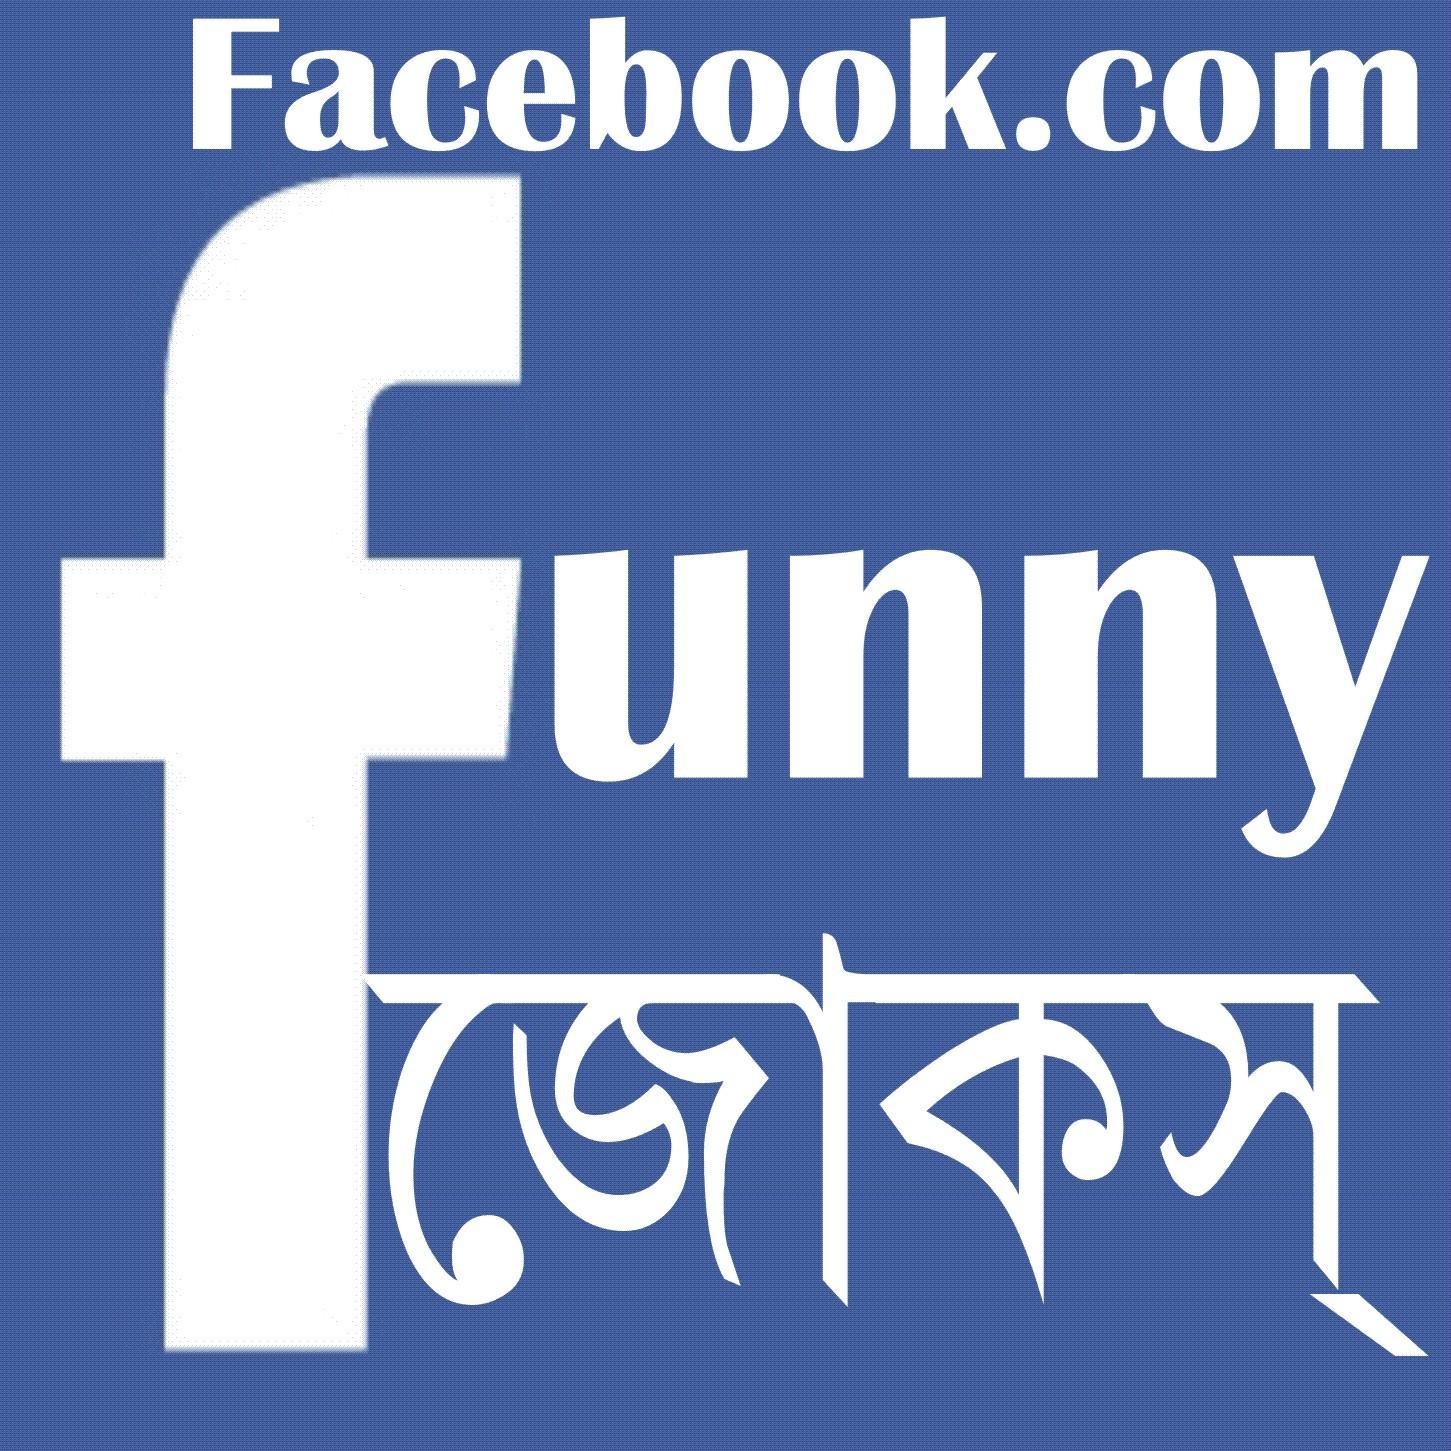 Facebook Funny Jokes In Bengali For Android Apk Download